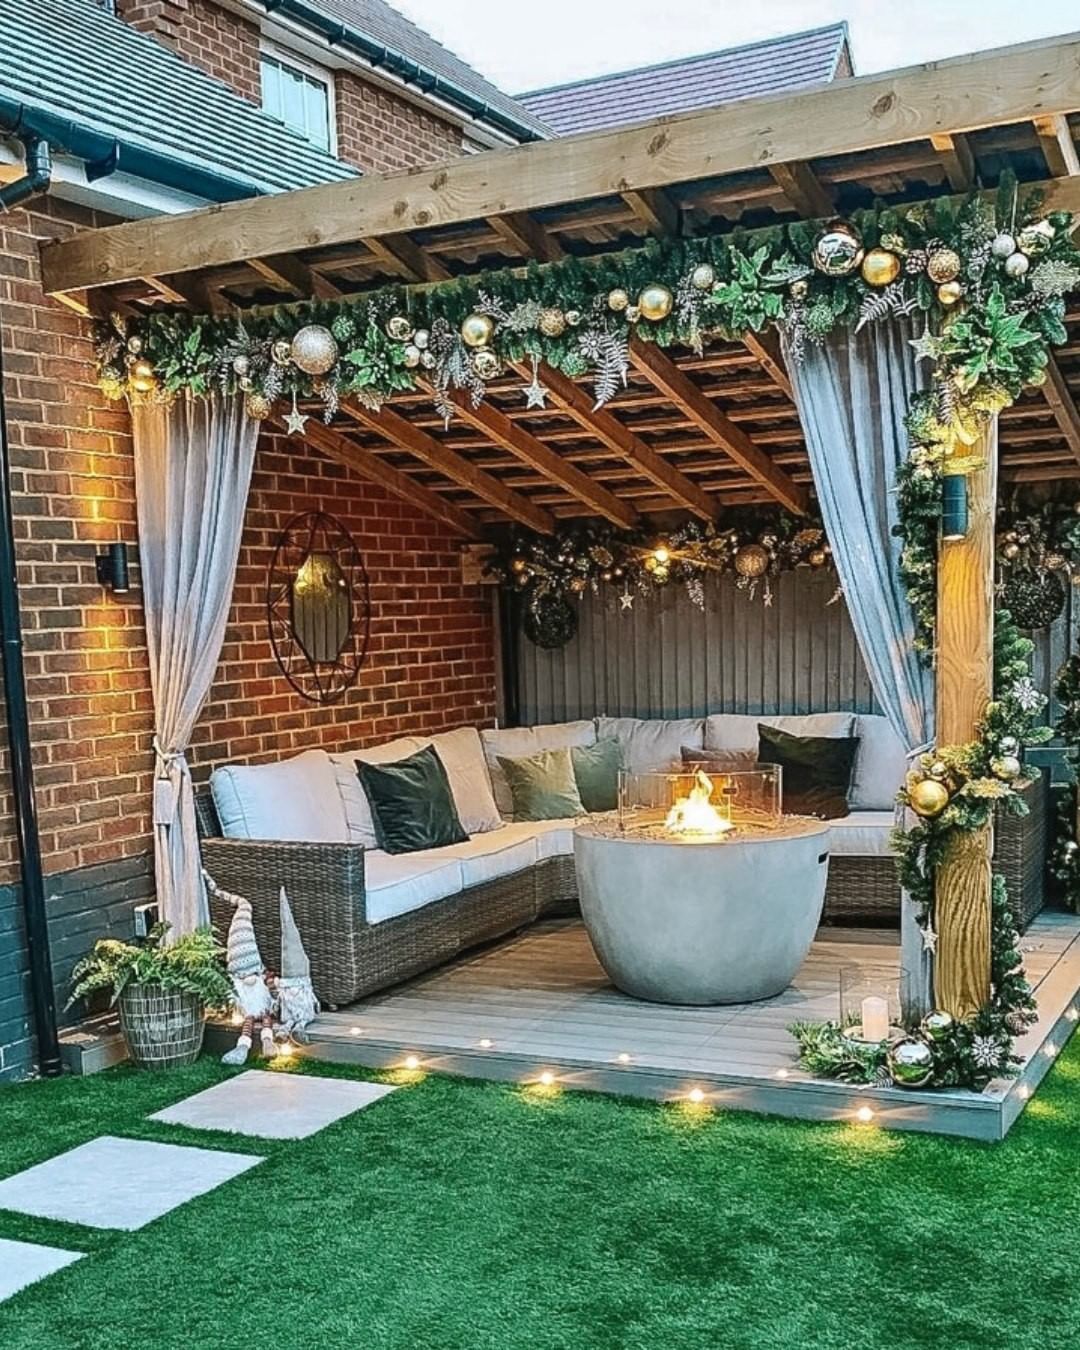 Enhance Your Outdoor Space with Beautiful Garden Seating